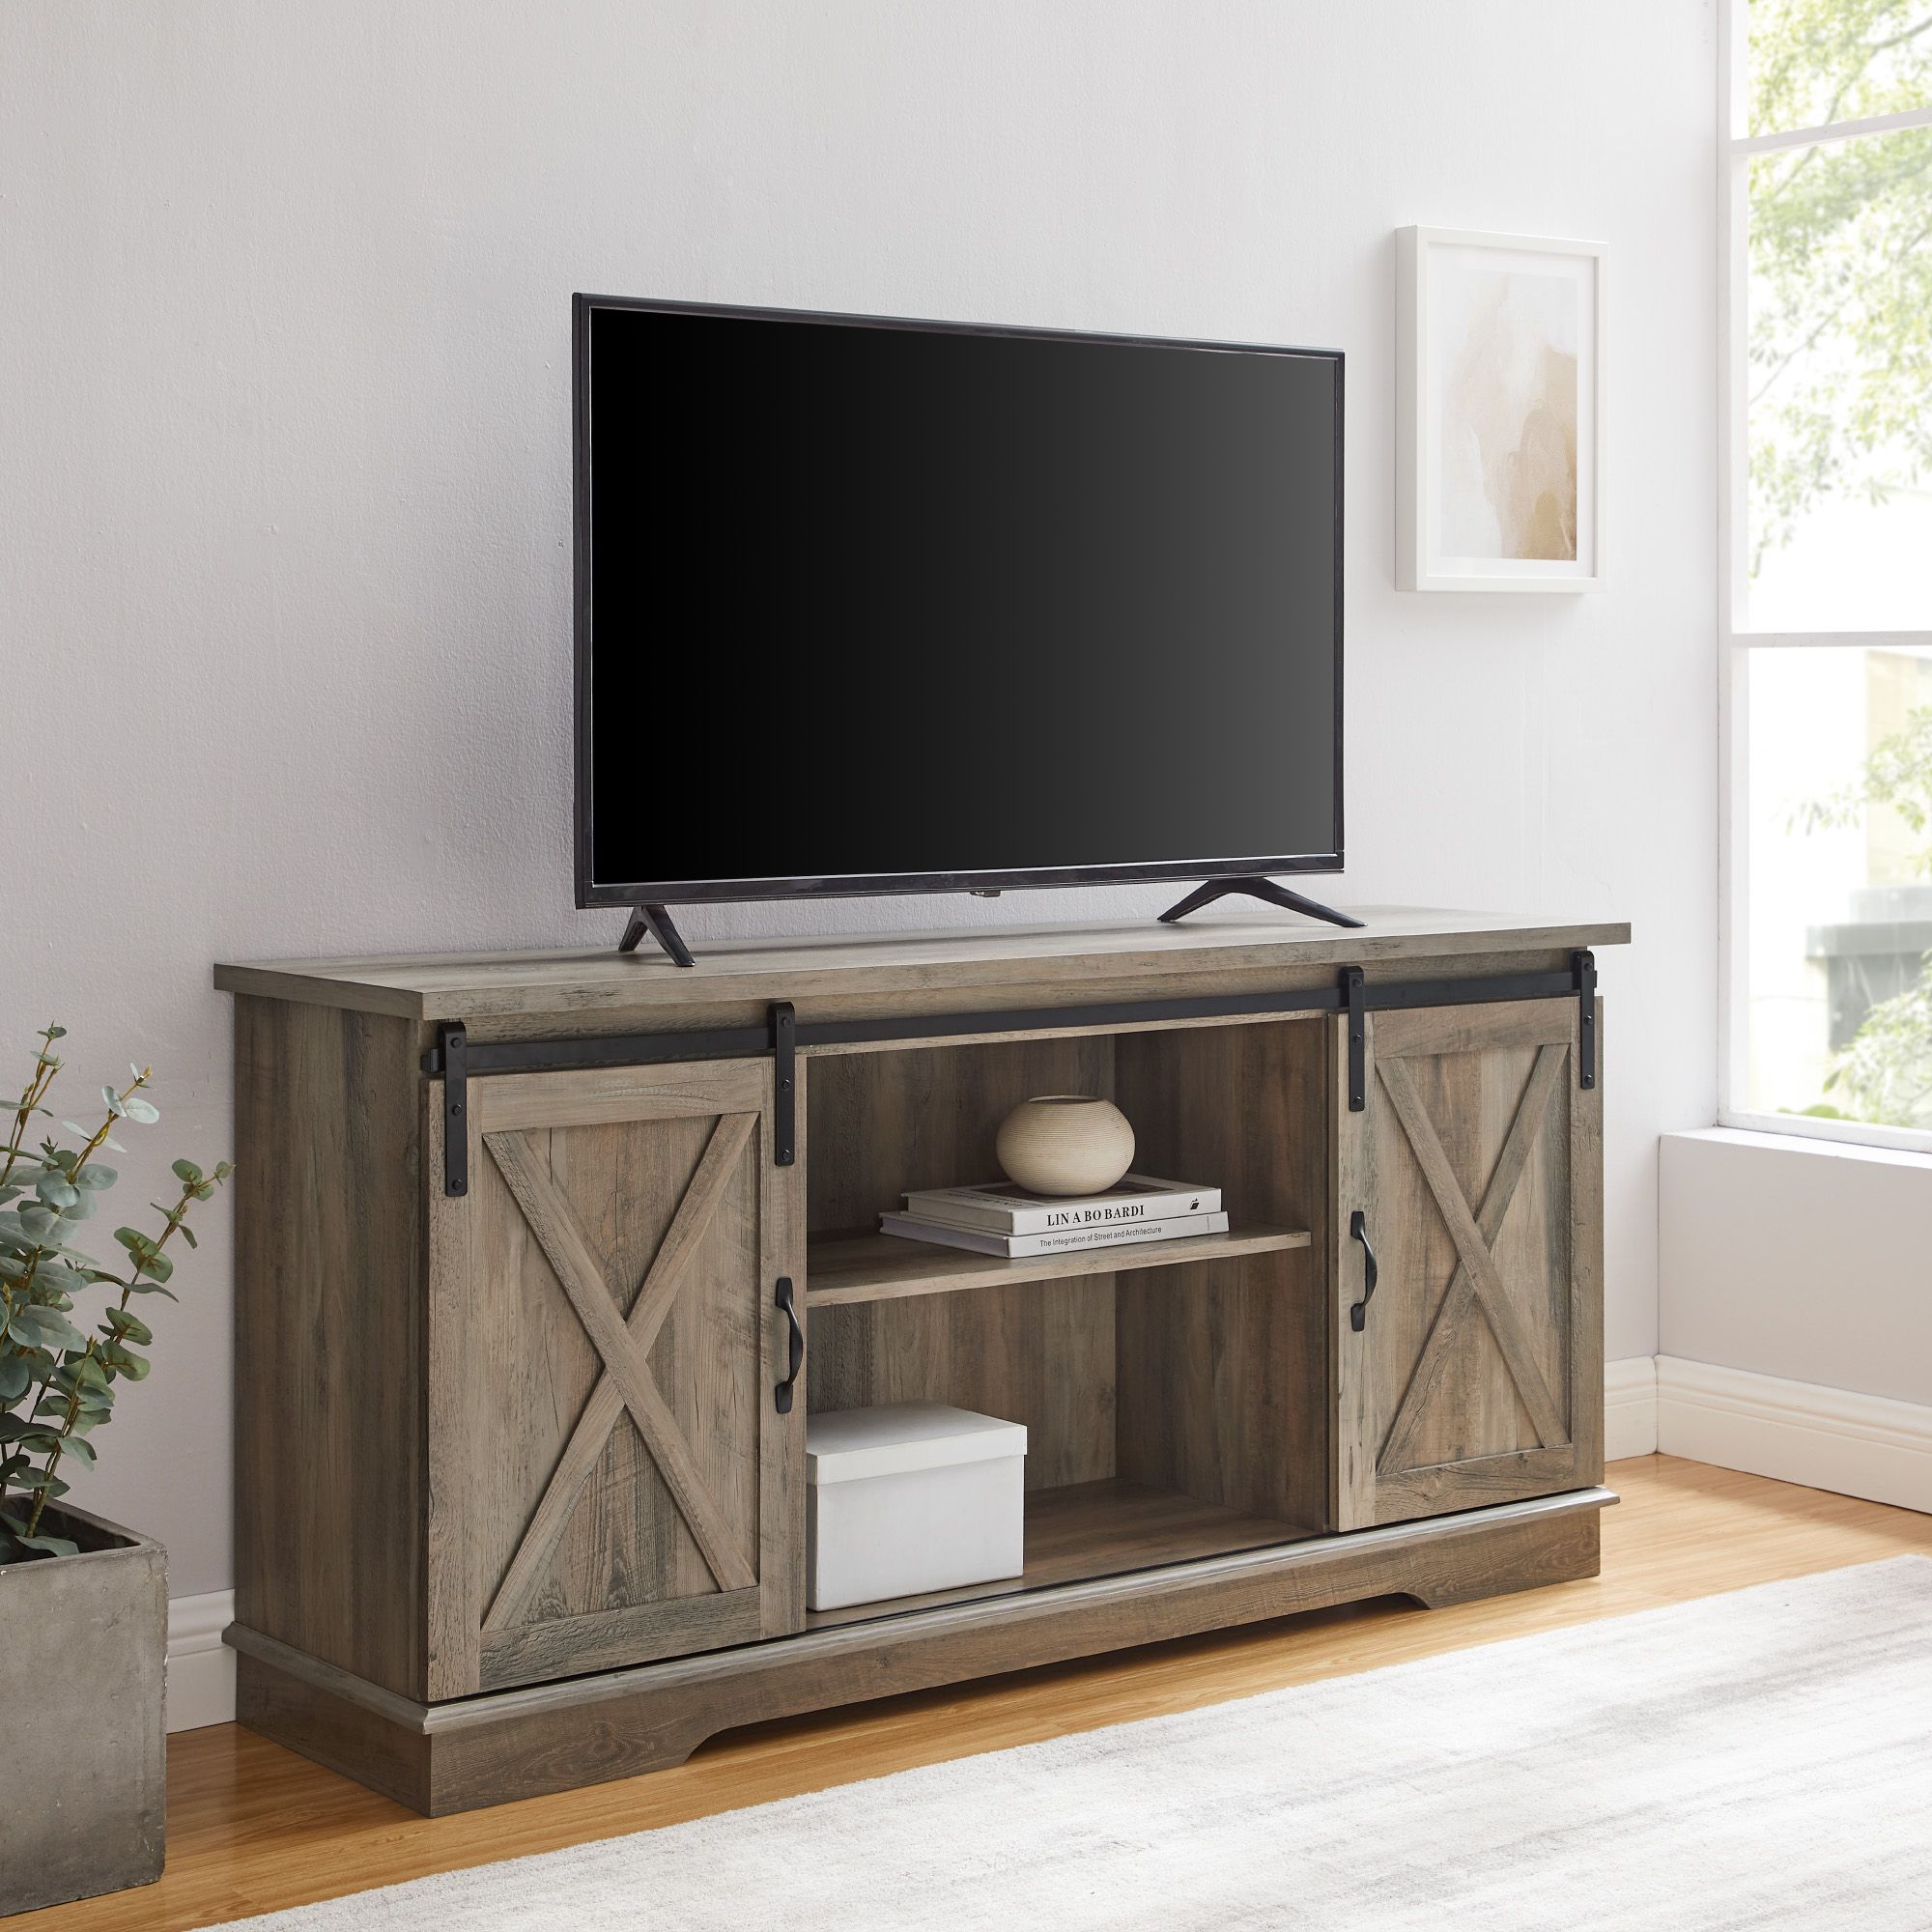 Woven Paths Farmhouse Sliding Barn Door Tv Stand For Tvs Throughout Wolla Tv Stands For Tvs Up To 65" (View 1 of 15)